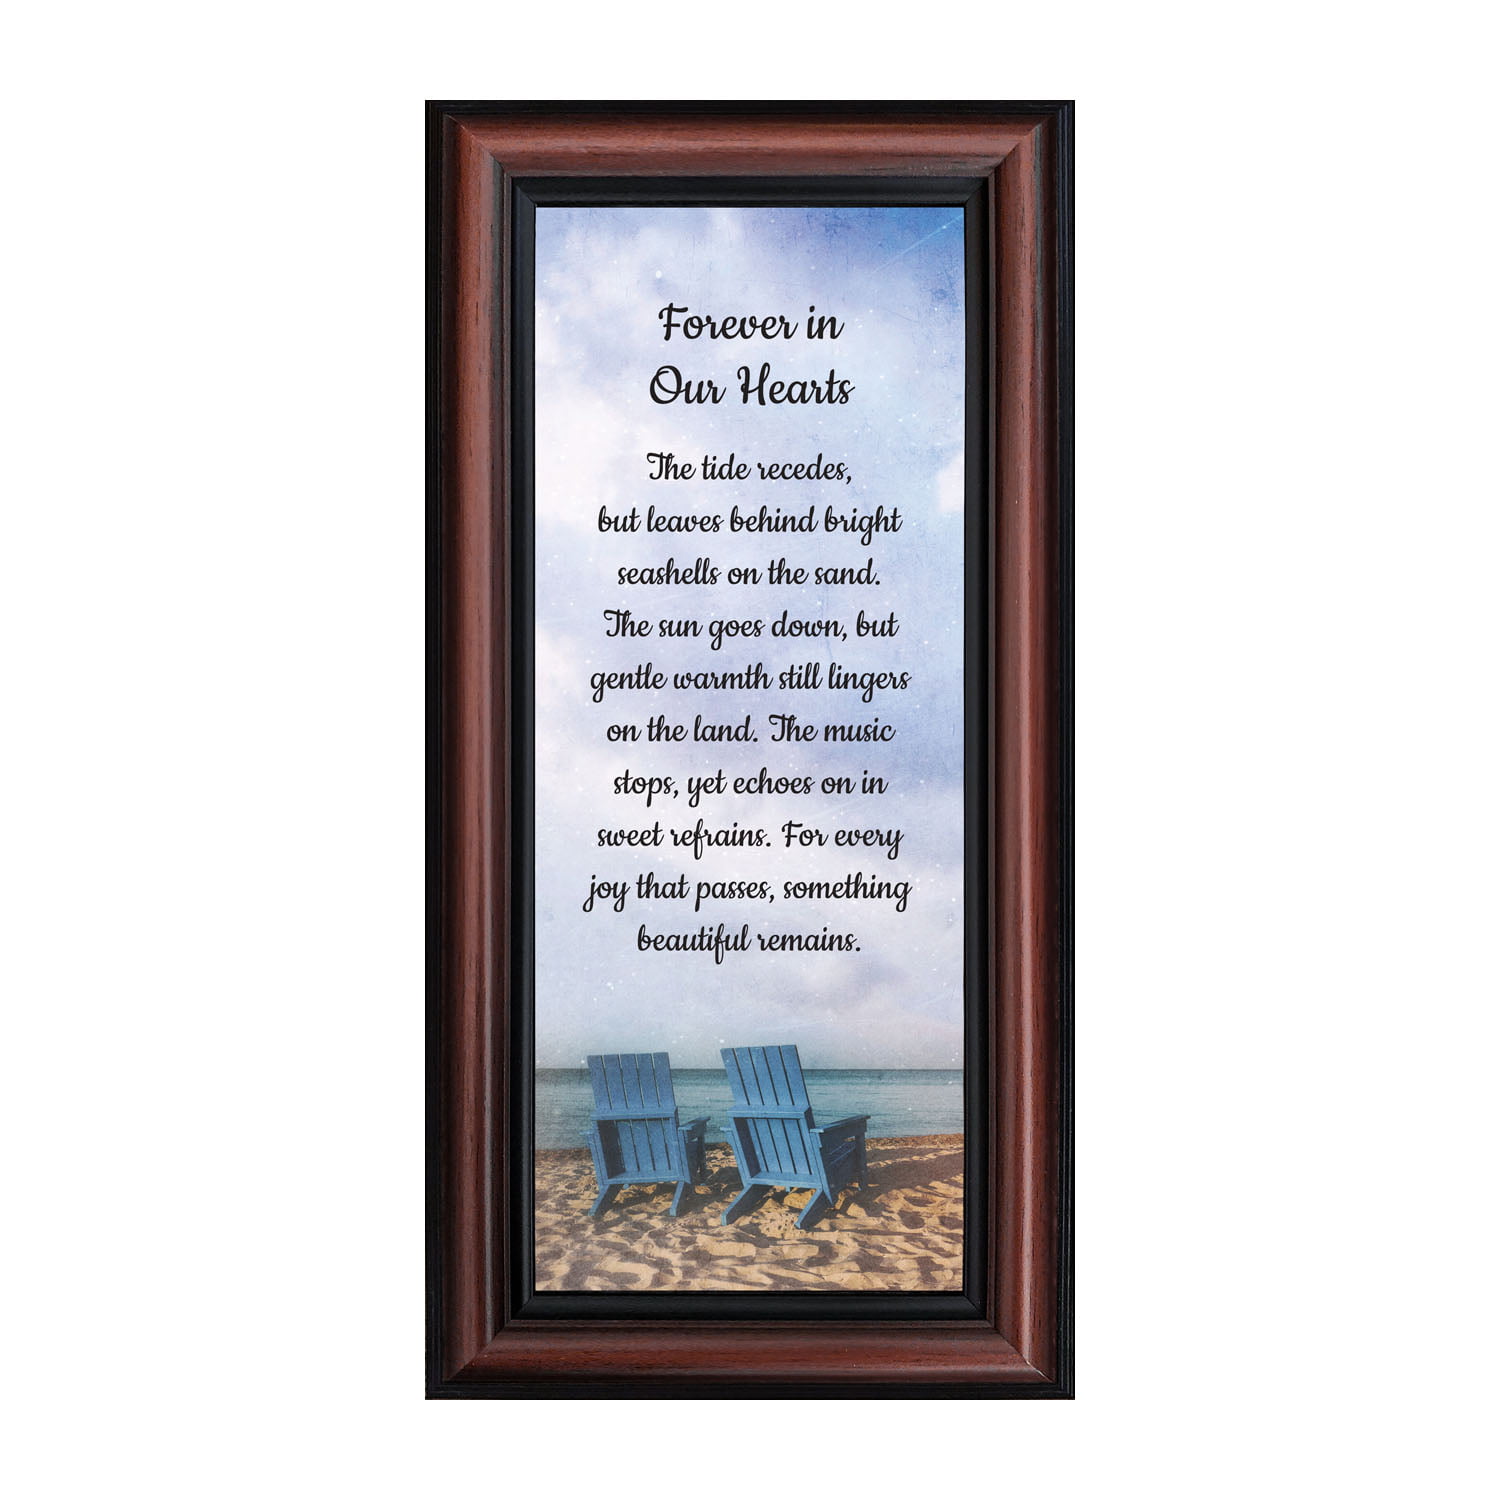 Memorial Gifts Picture Frames, Sympathy Gifts for Loss of